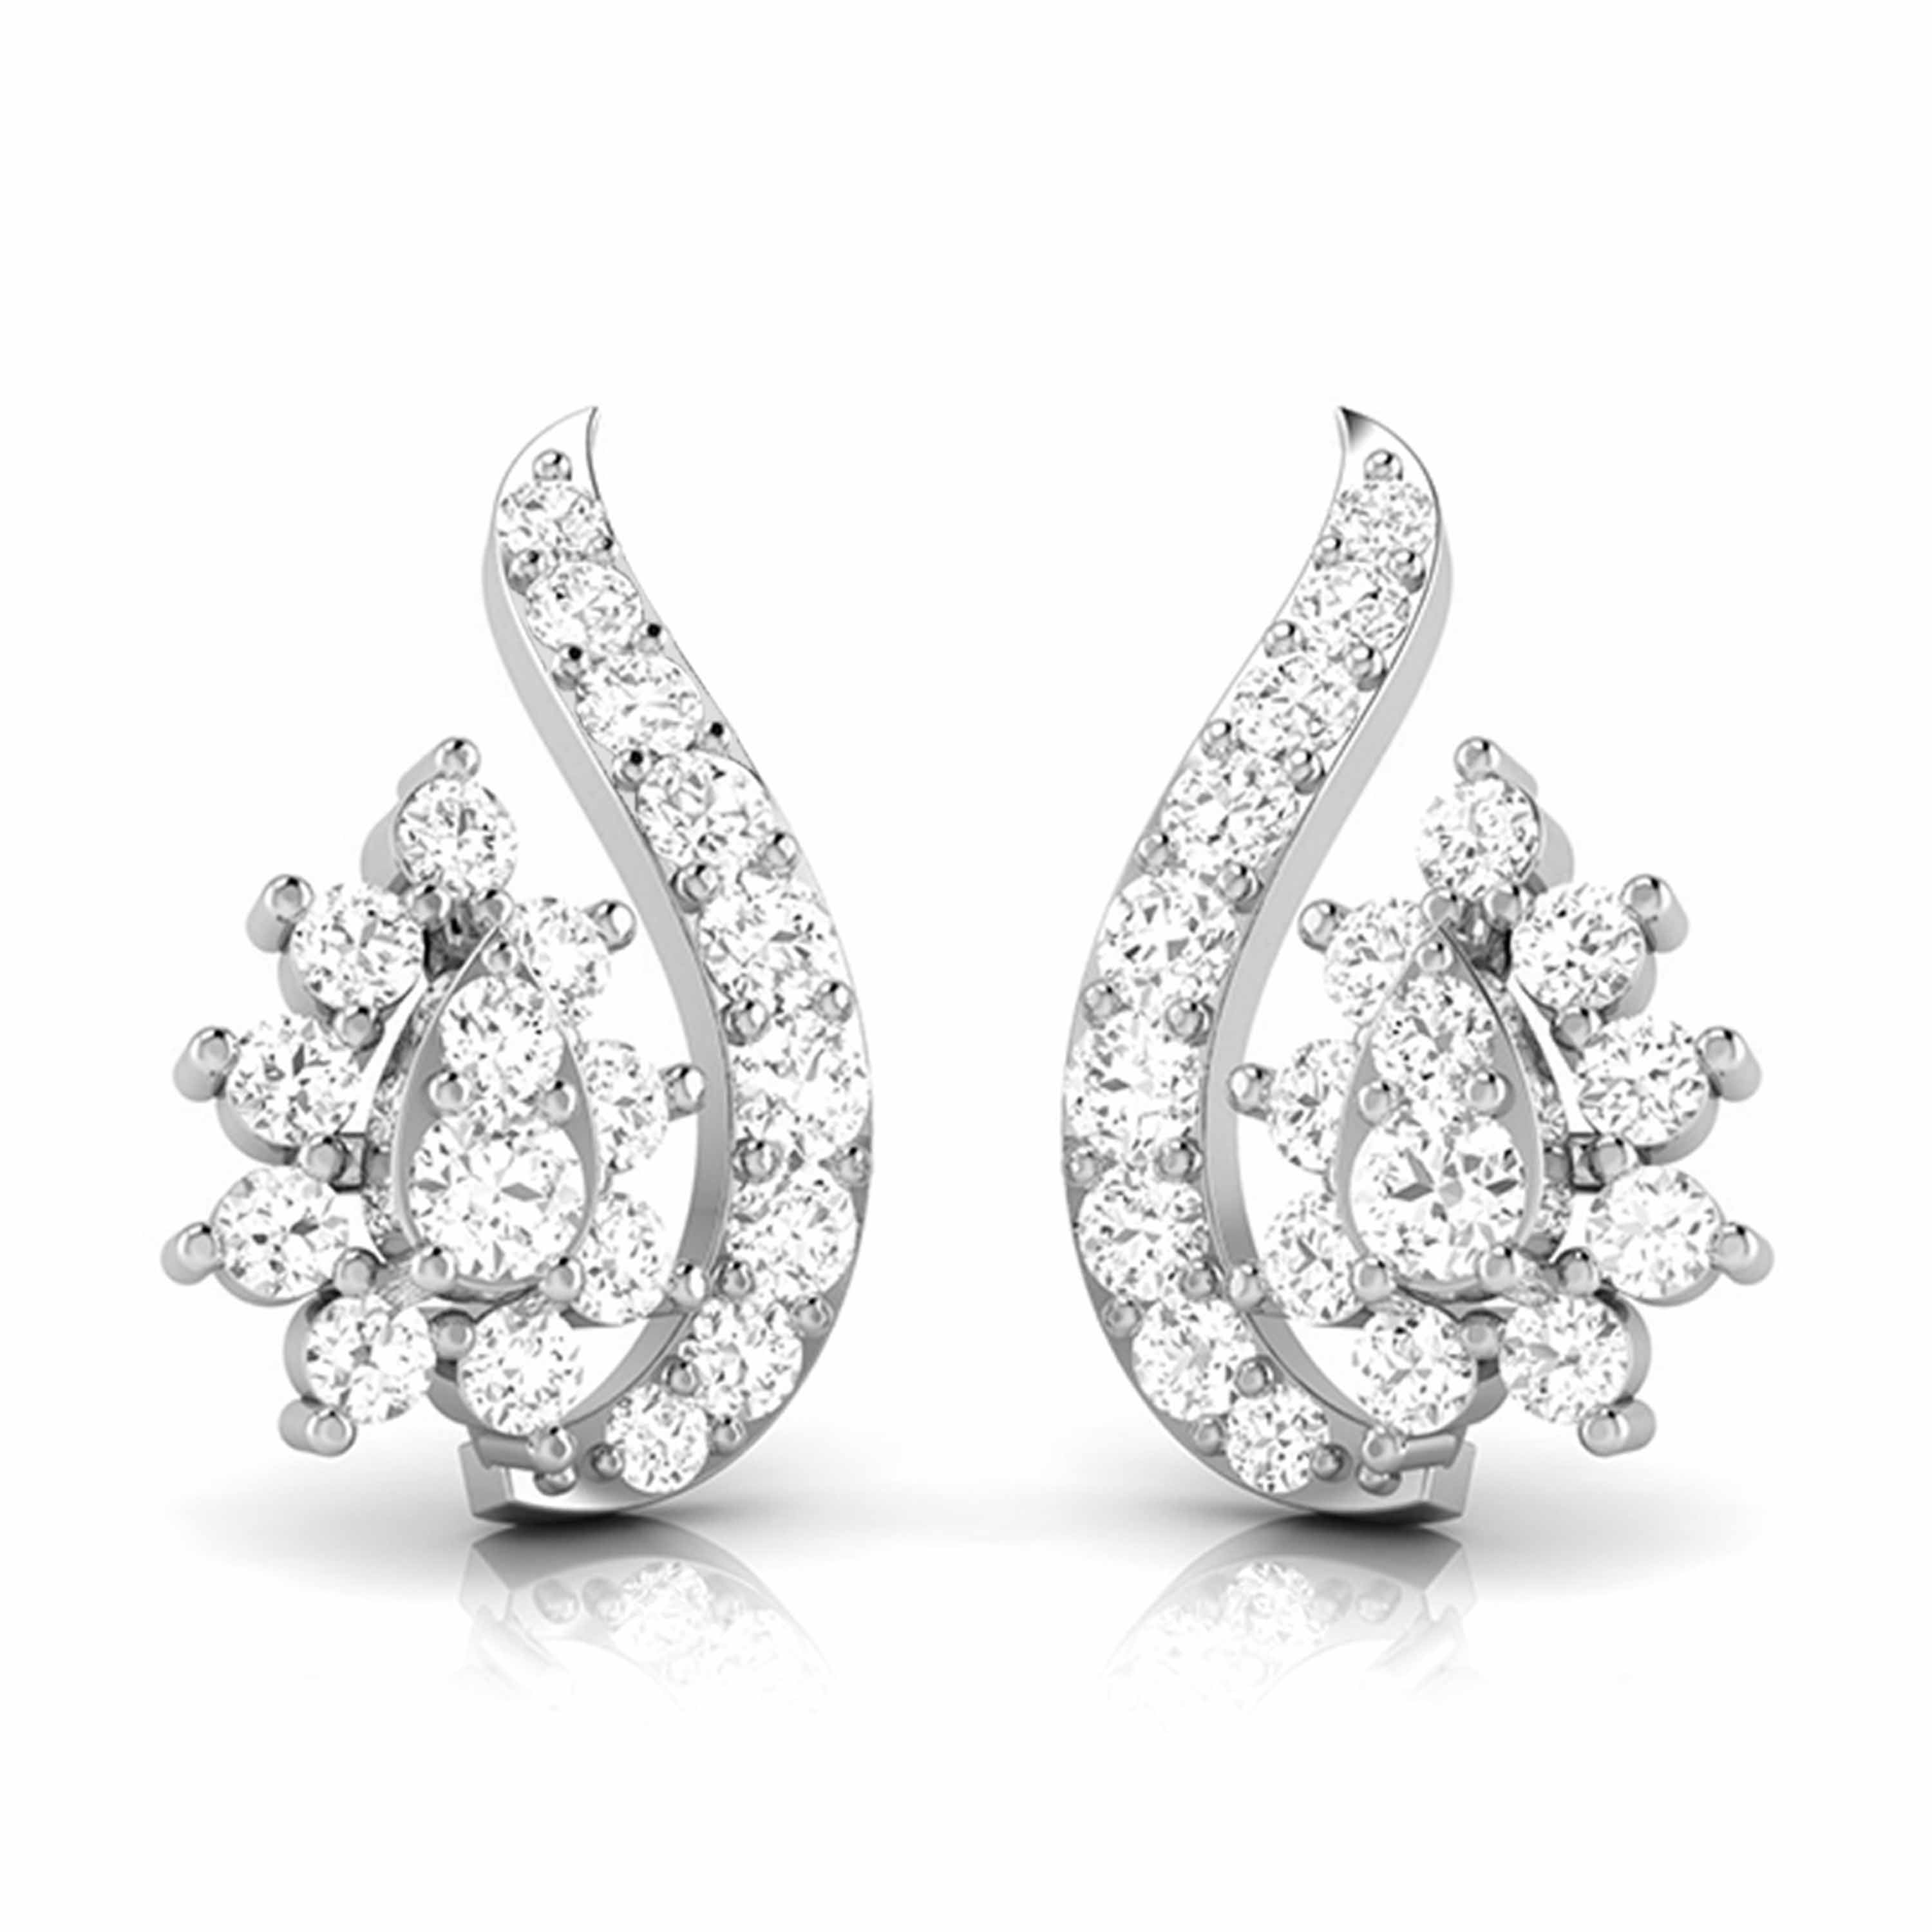 Solitaire Brilliant Stud Earrings - 6 prong Finished in Pure Platinum -  CRISLU